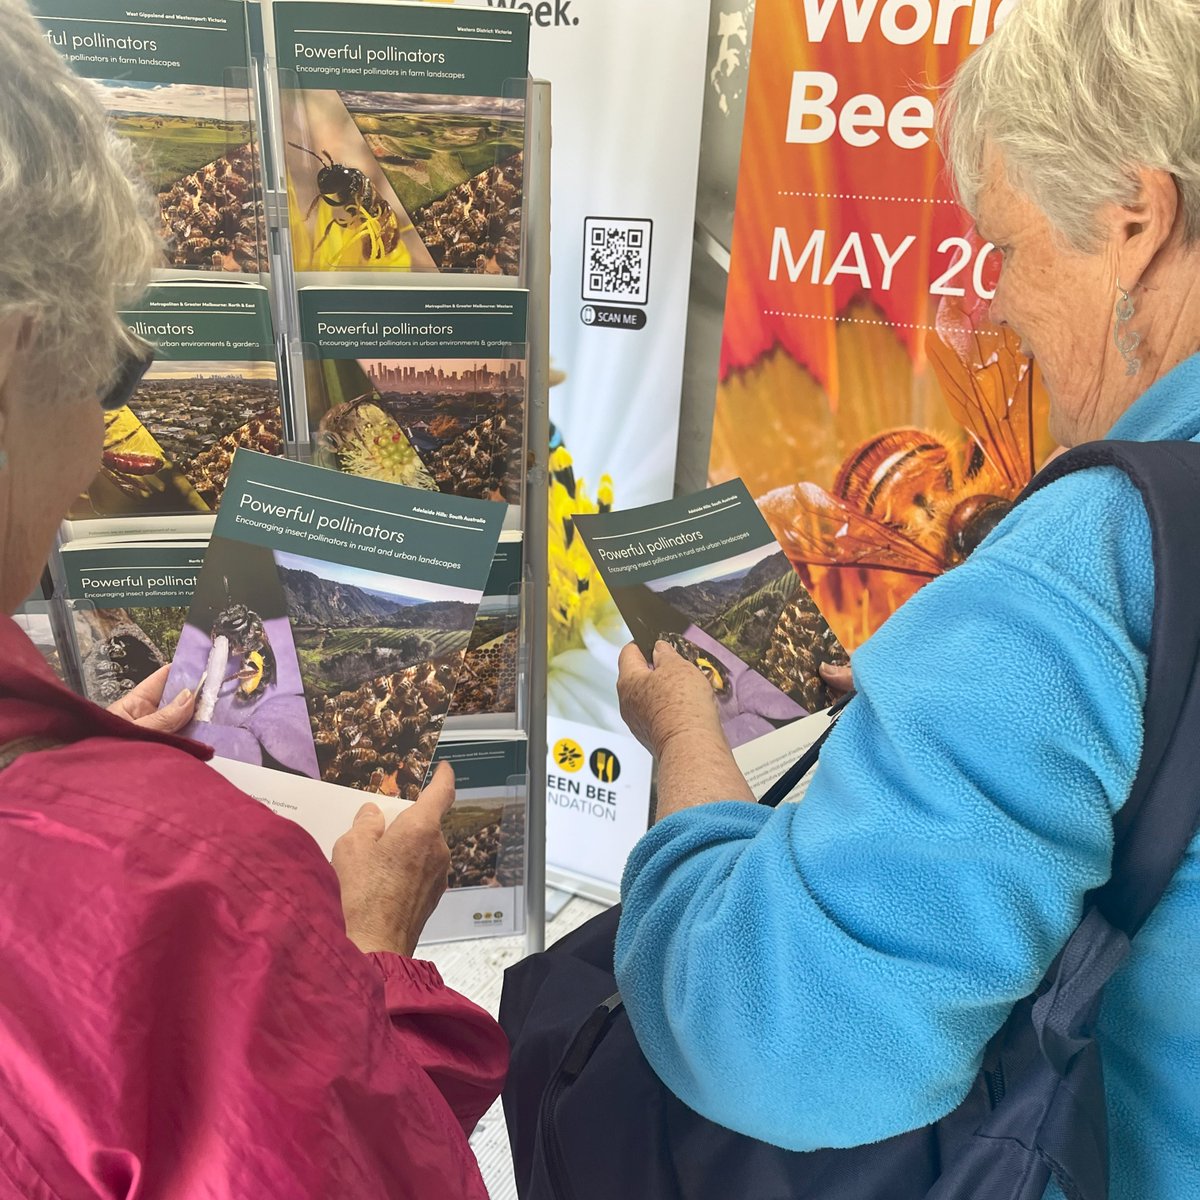 We had a fantastic time seeing everyone at the Melbourne International Flower and Garden Show last week. Thank you to everyone who visited the Wheen Bee Foundation Bee Learning Hub. It was great to see people of all ages interested in learning more about bees. See you next year!